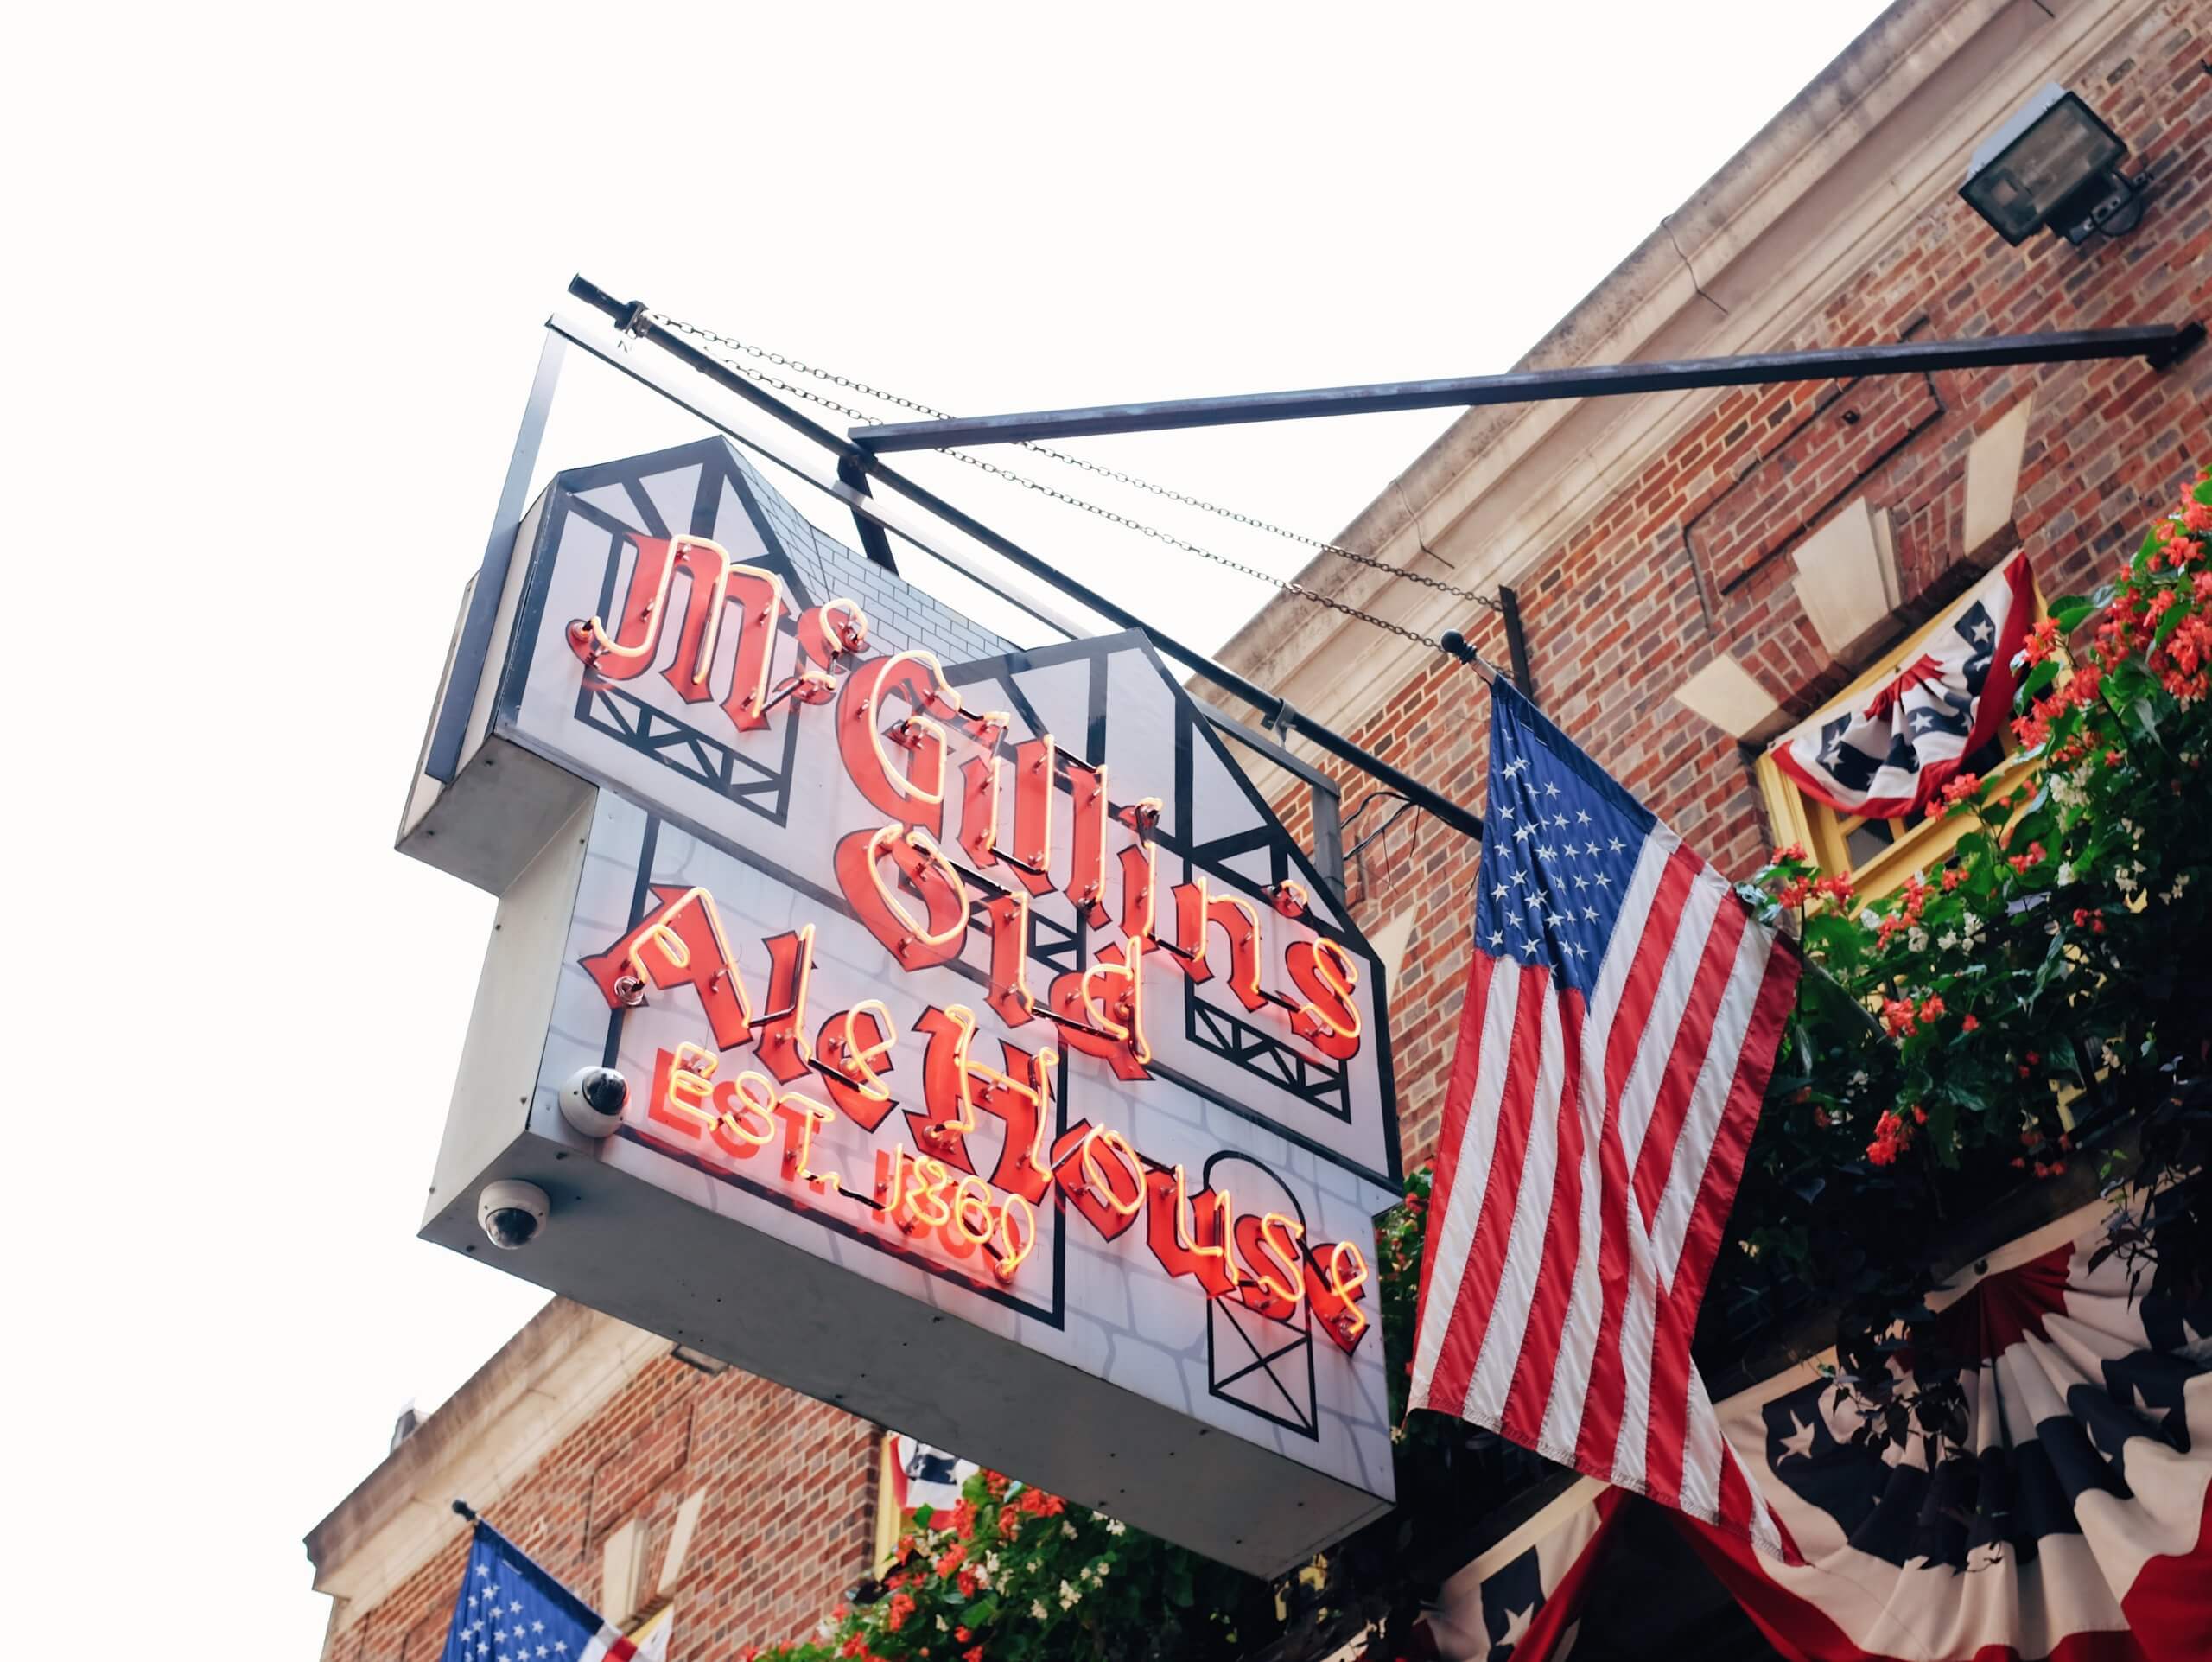 A neon sign for McGillin's Old Ale House hangs outside of the establishment. An American flag is hanging beside it. Both are attached to an old, brick building on the right